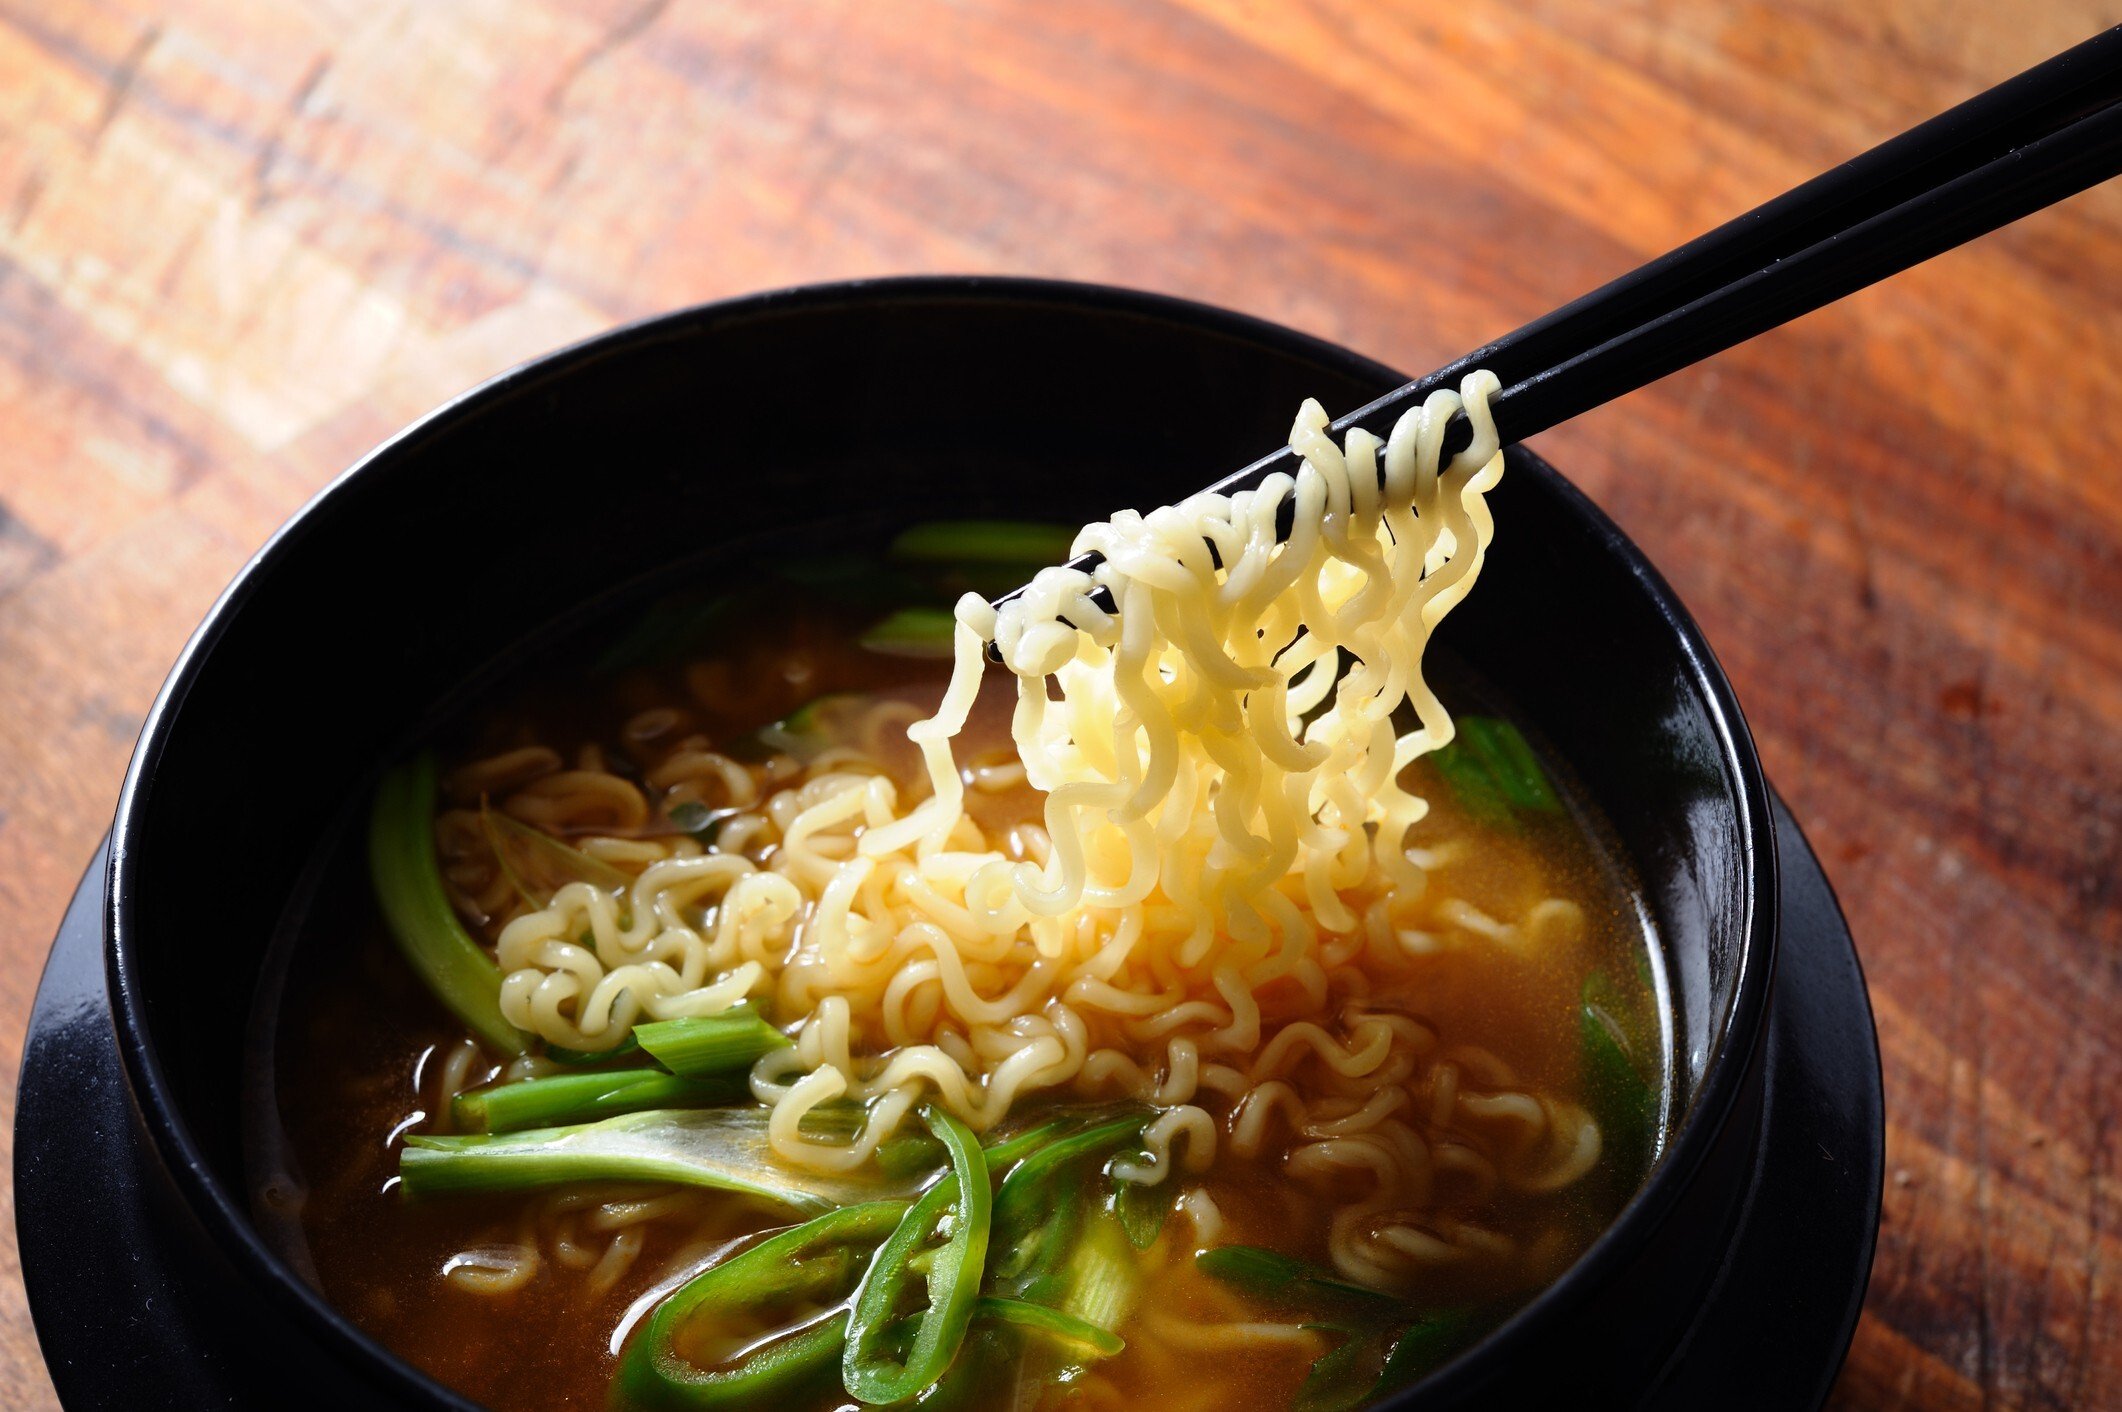 Instant noodles are a staple for families across East Asia, and beyond. Photos: Getty Images